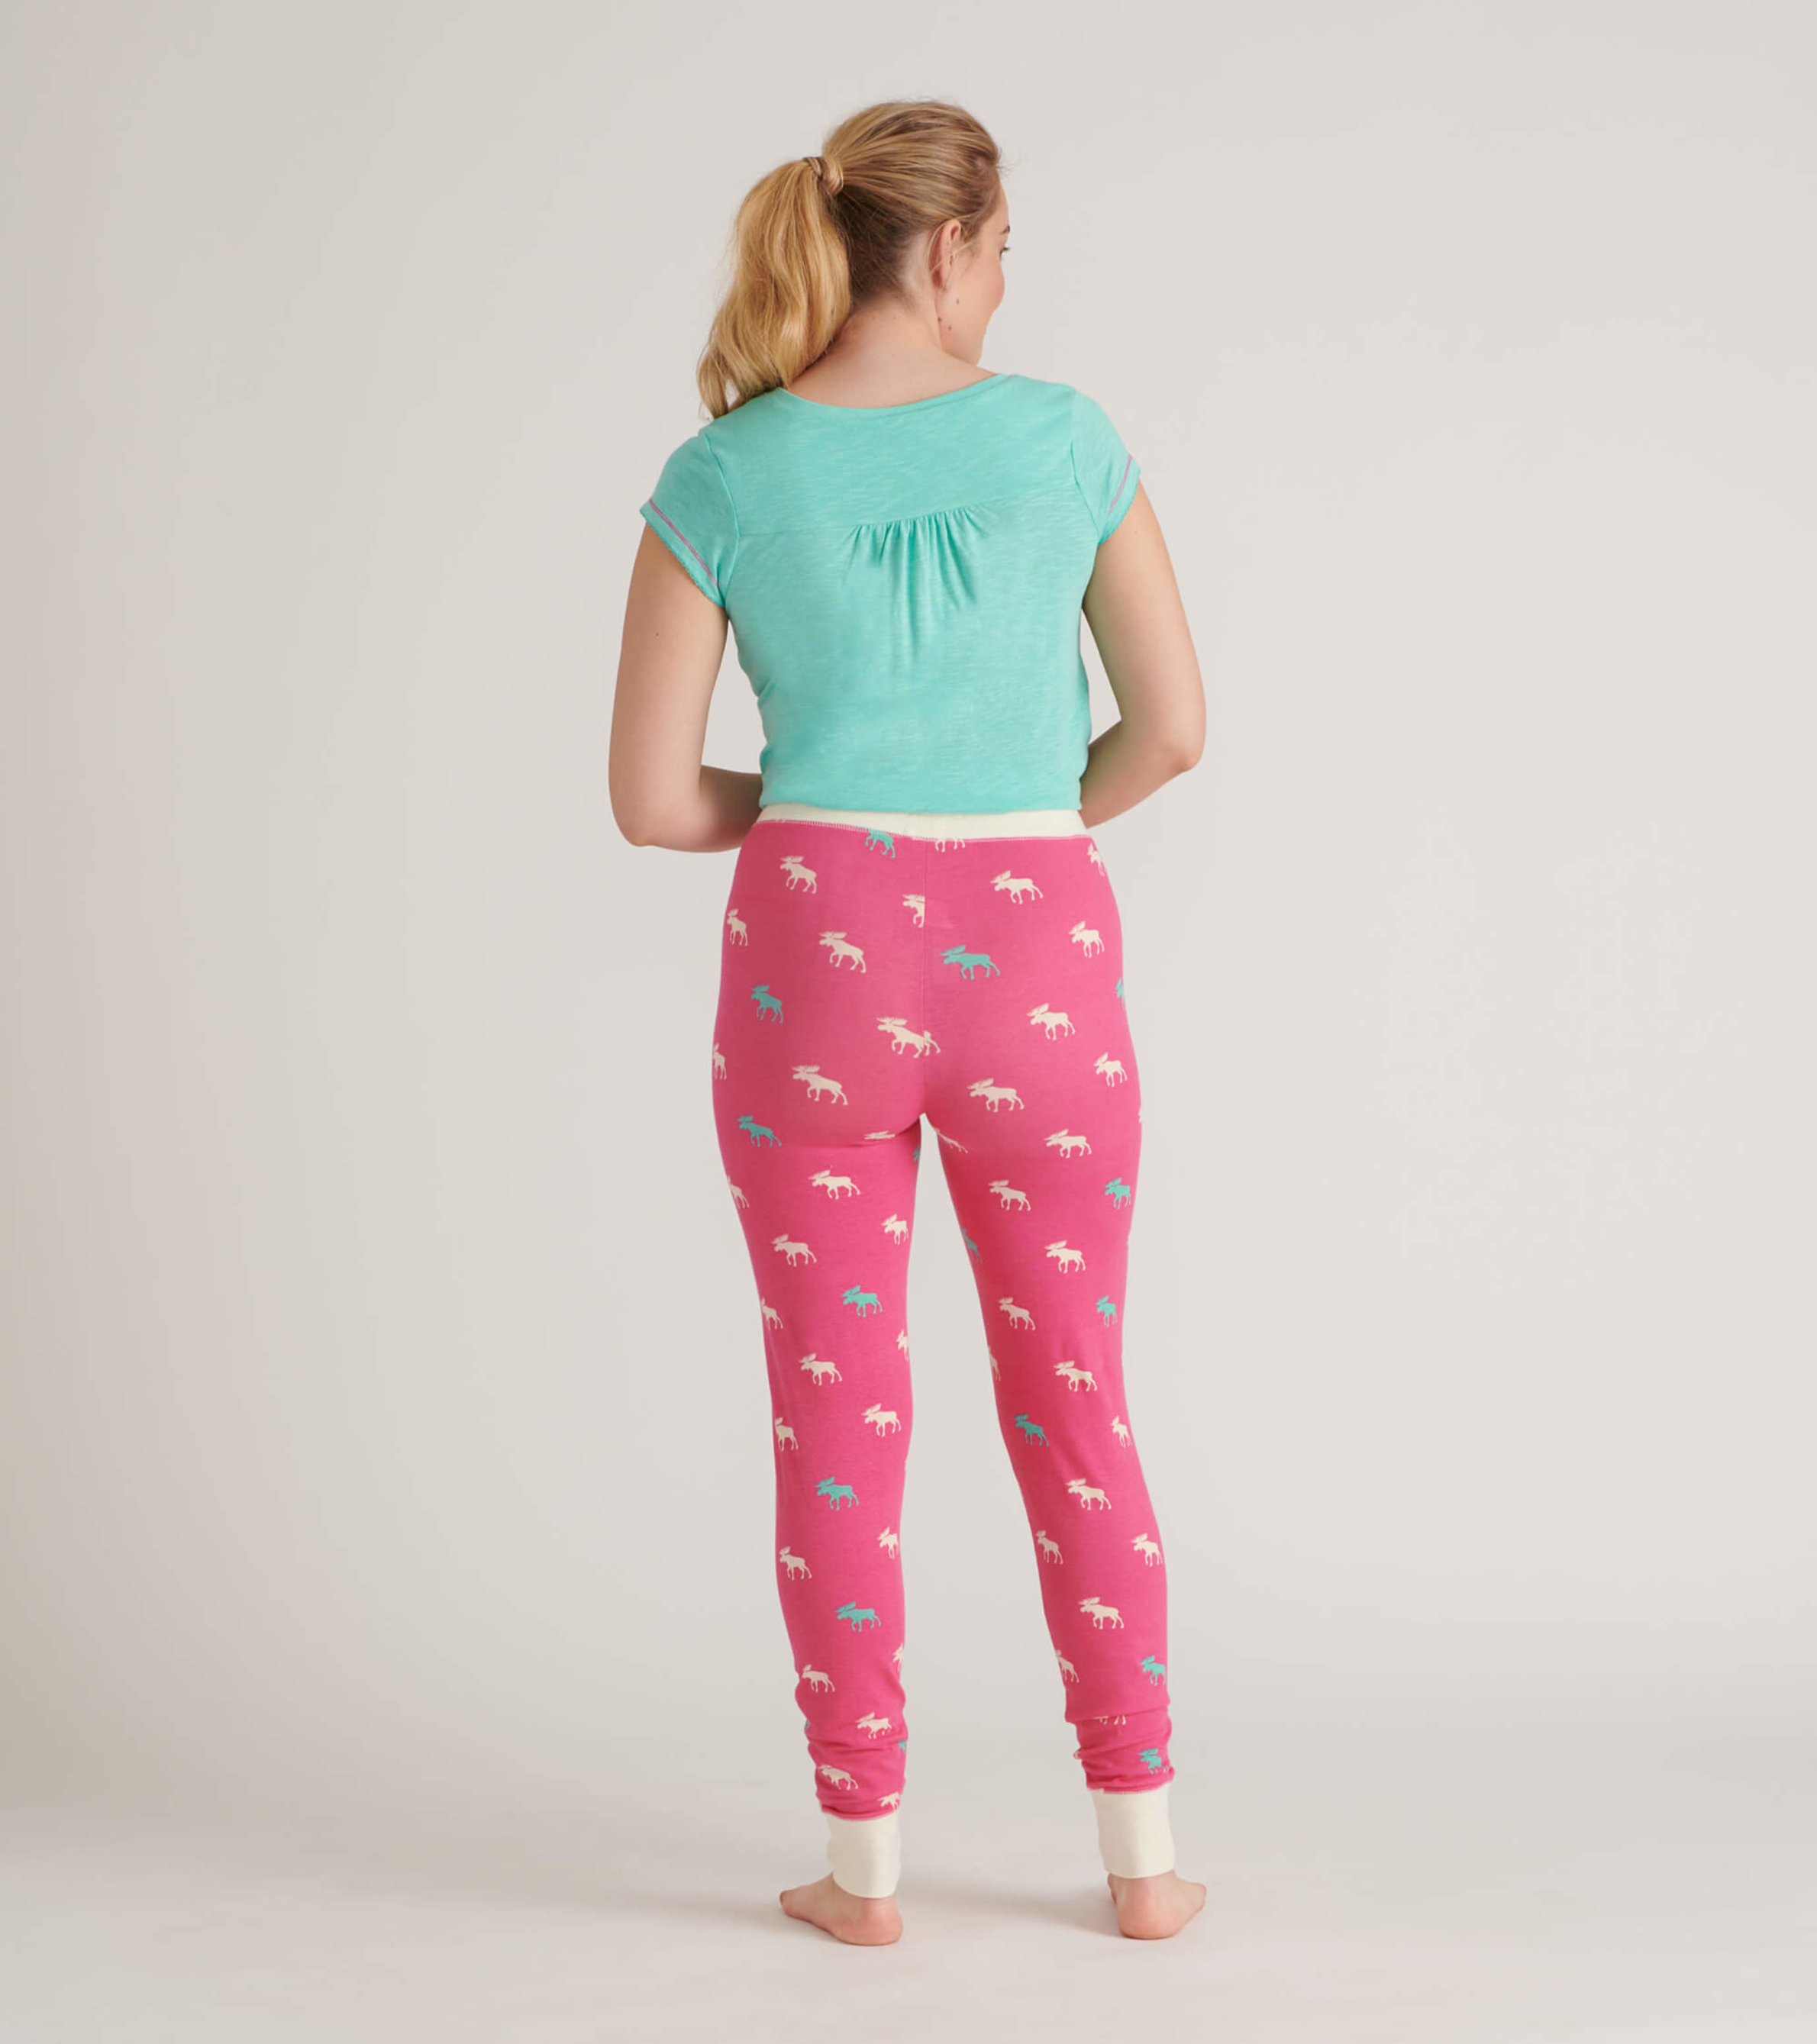 Glamping Women's Tee and Leggings Pajama Separates - Little Blue House US